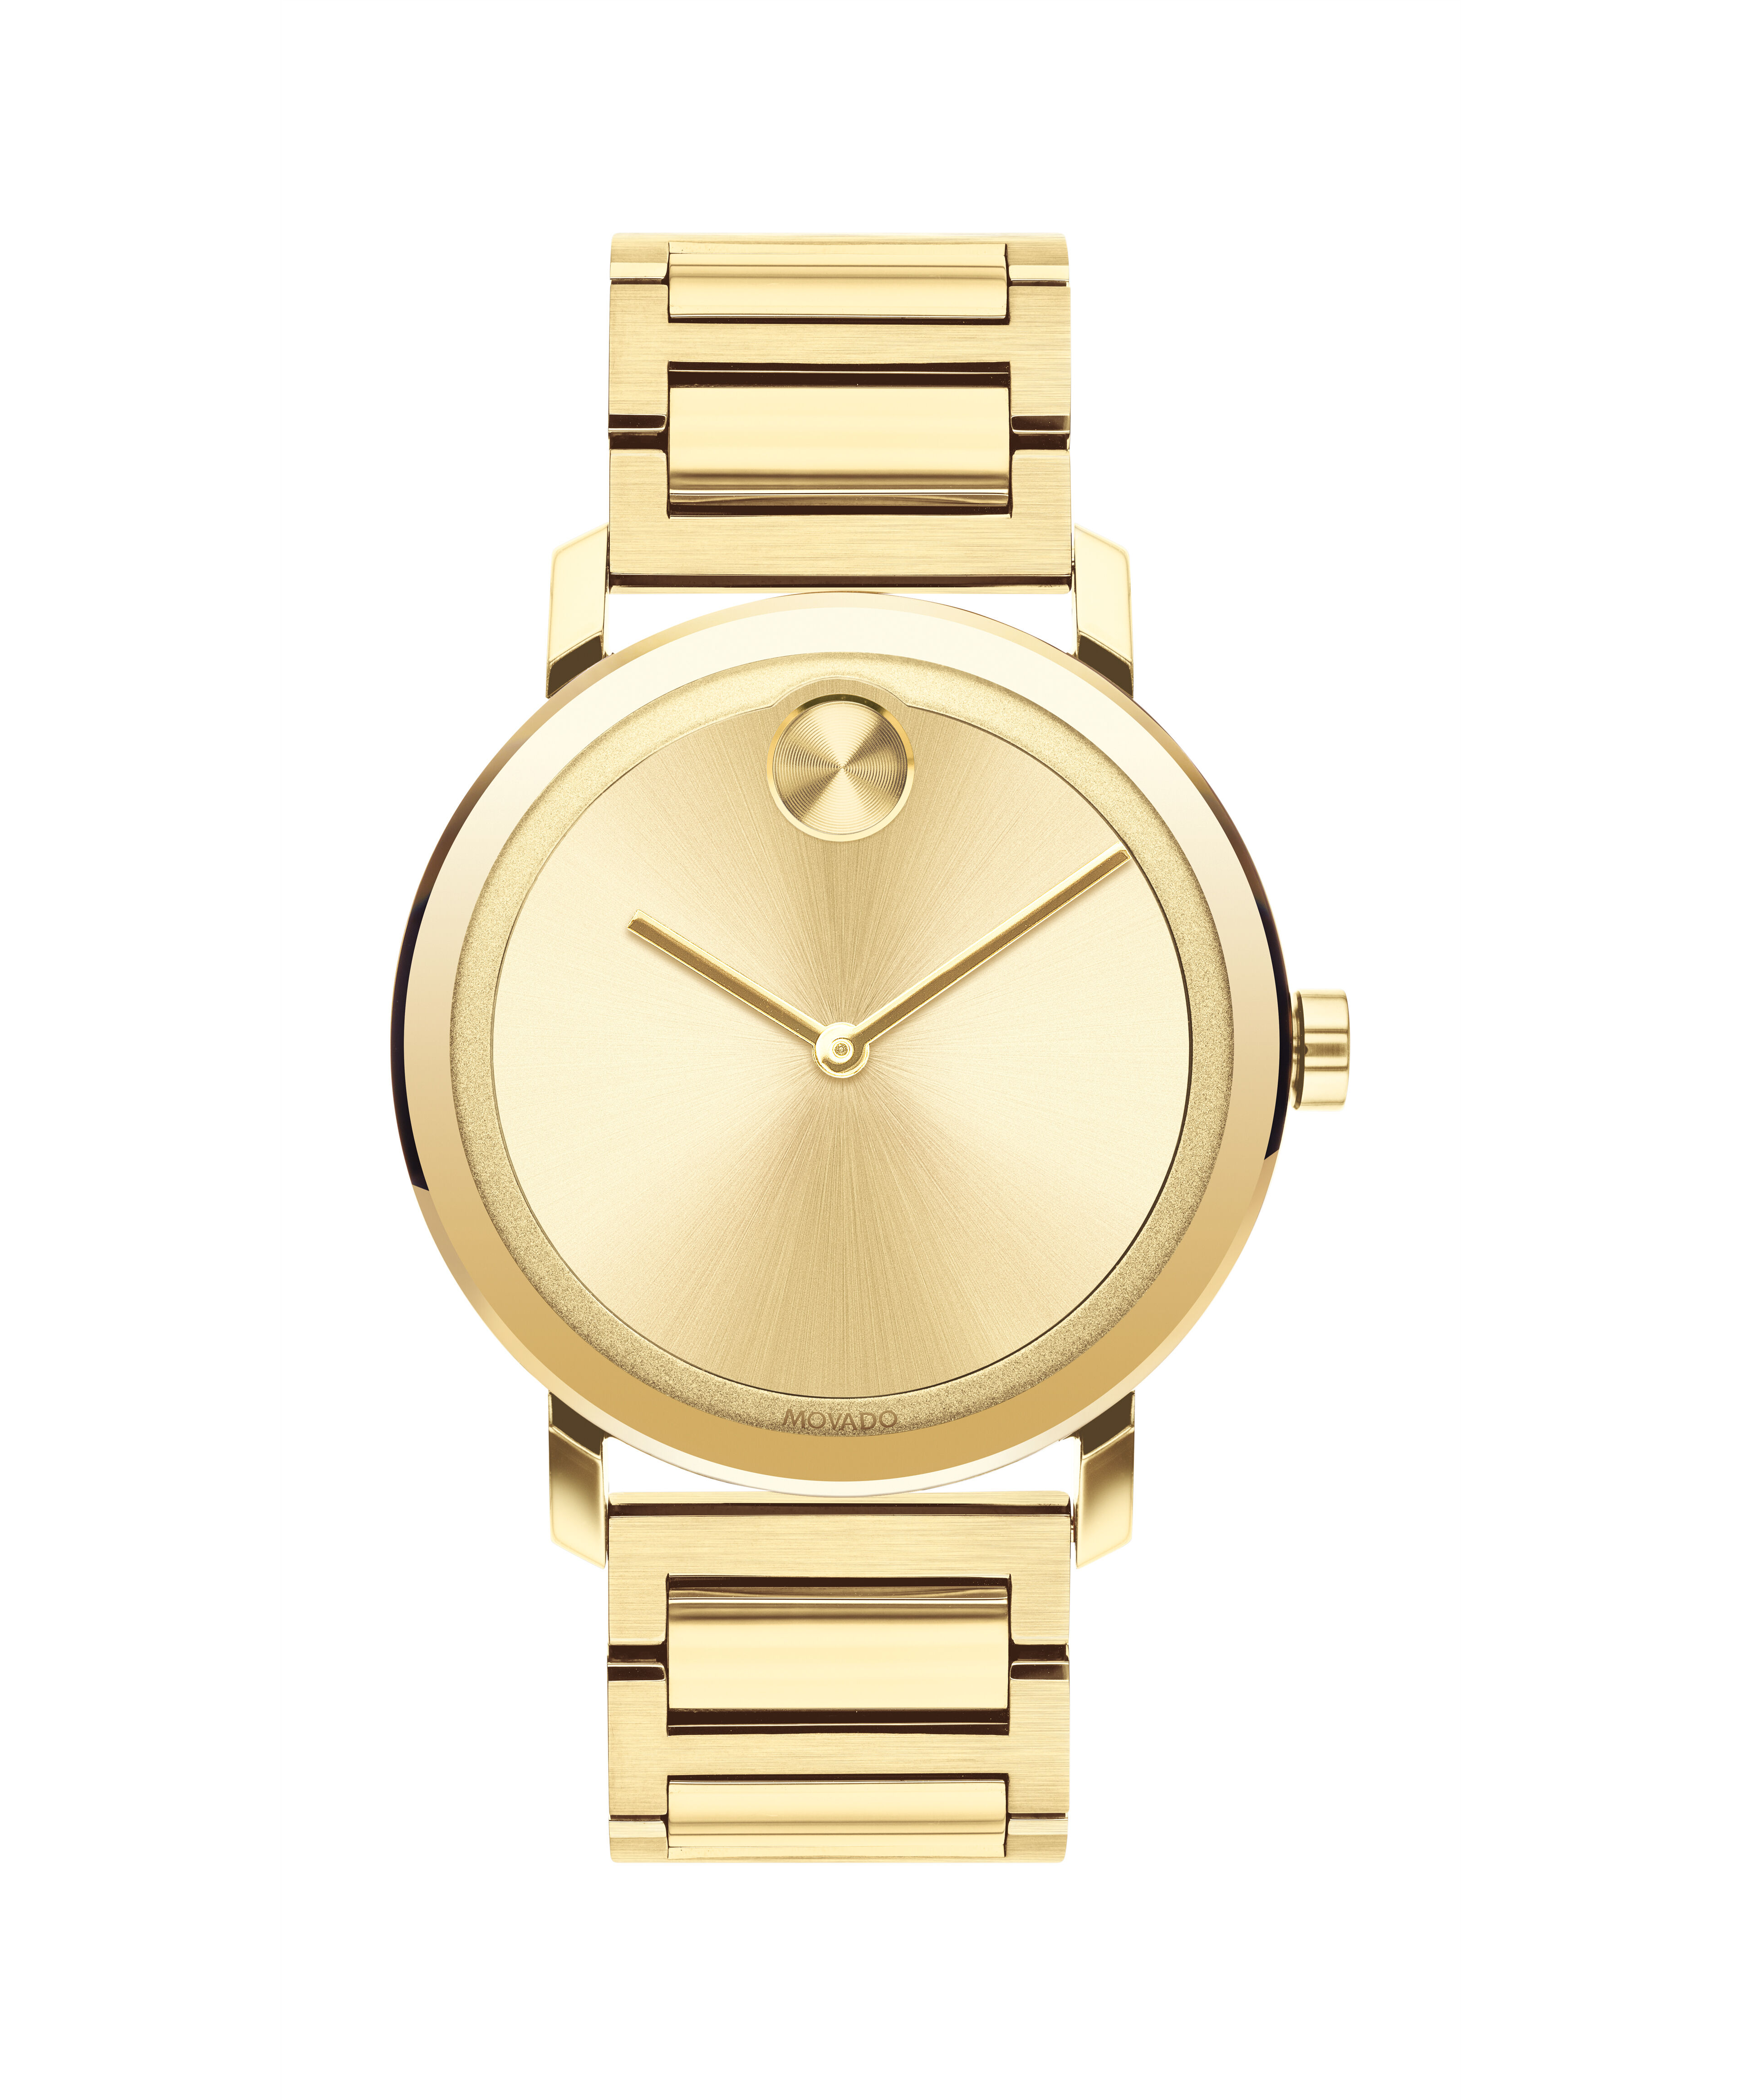 Rectangular Face Movado Watch What Is The Cheapeat Price For A Fake